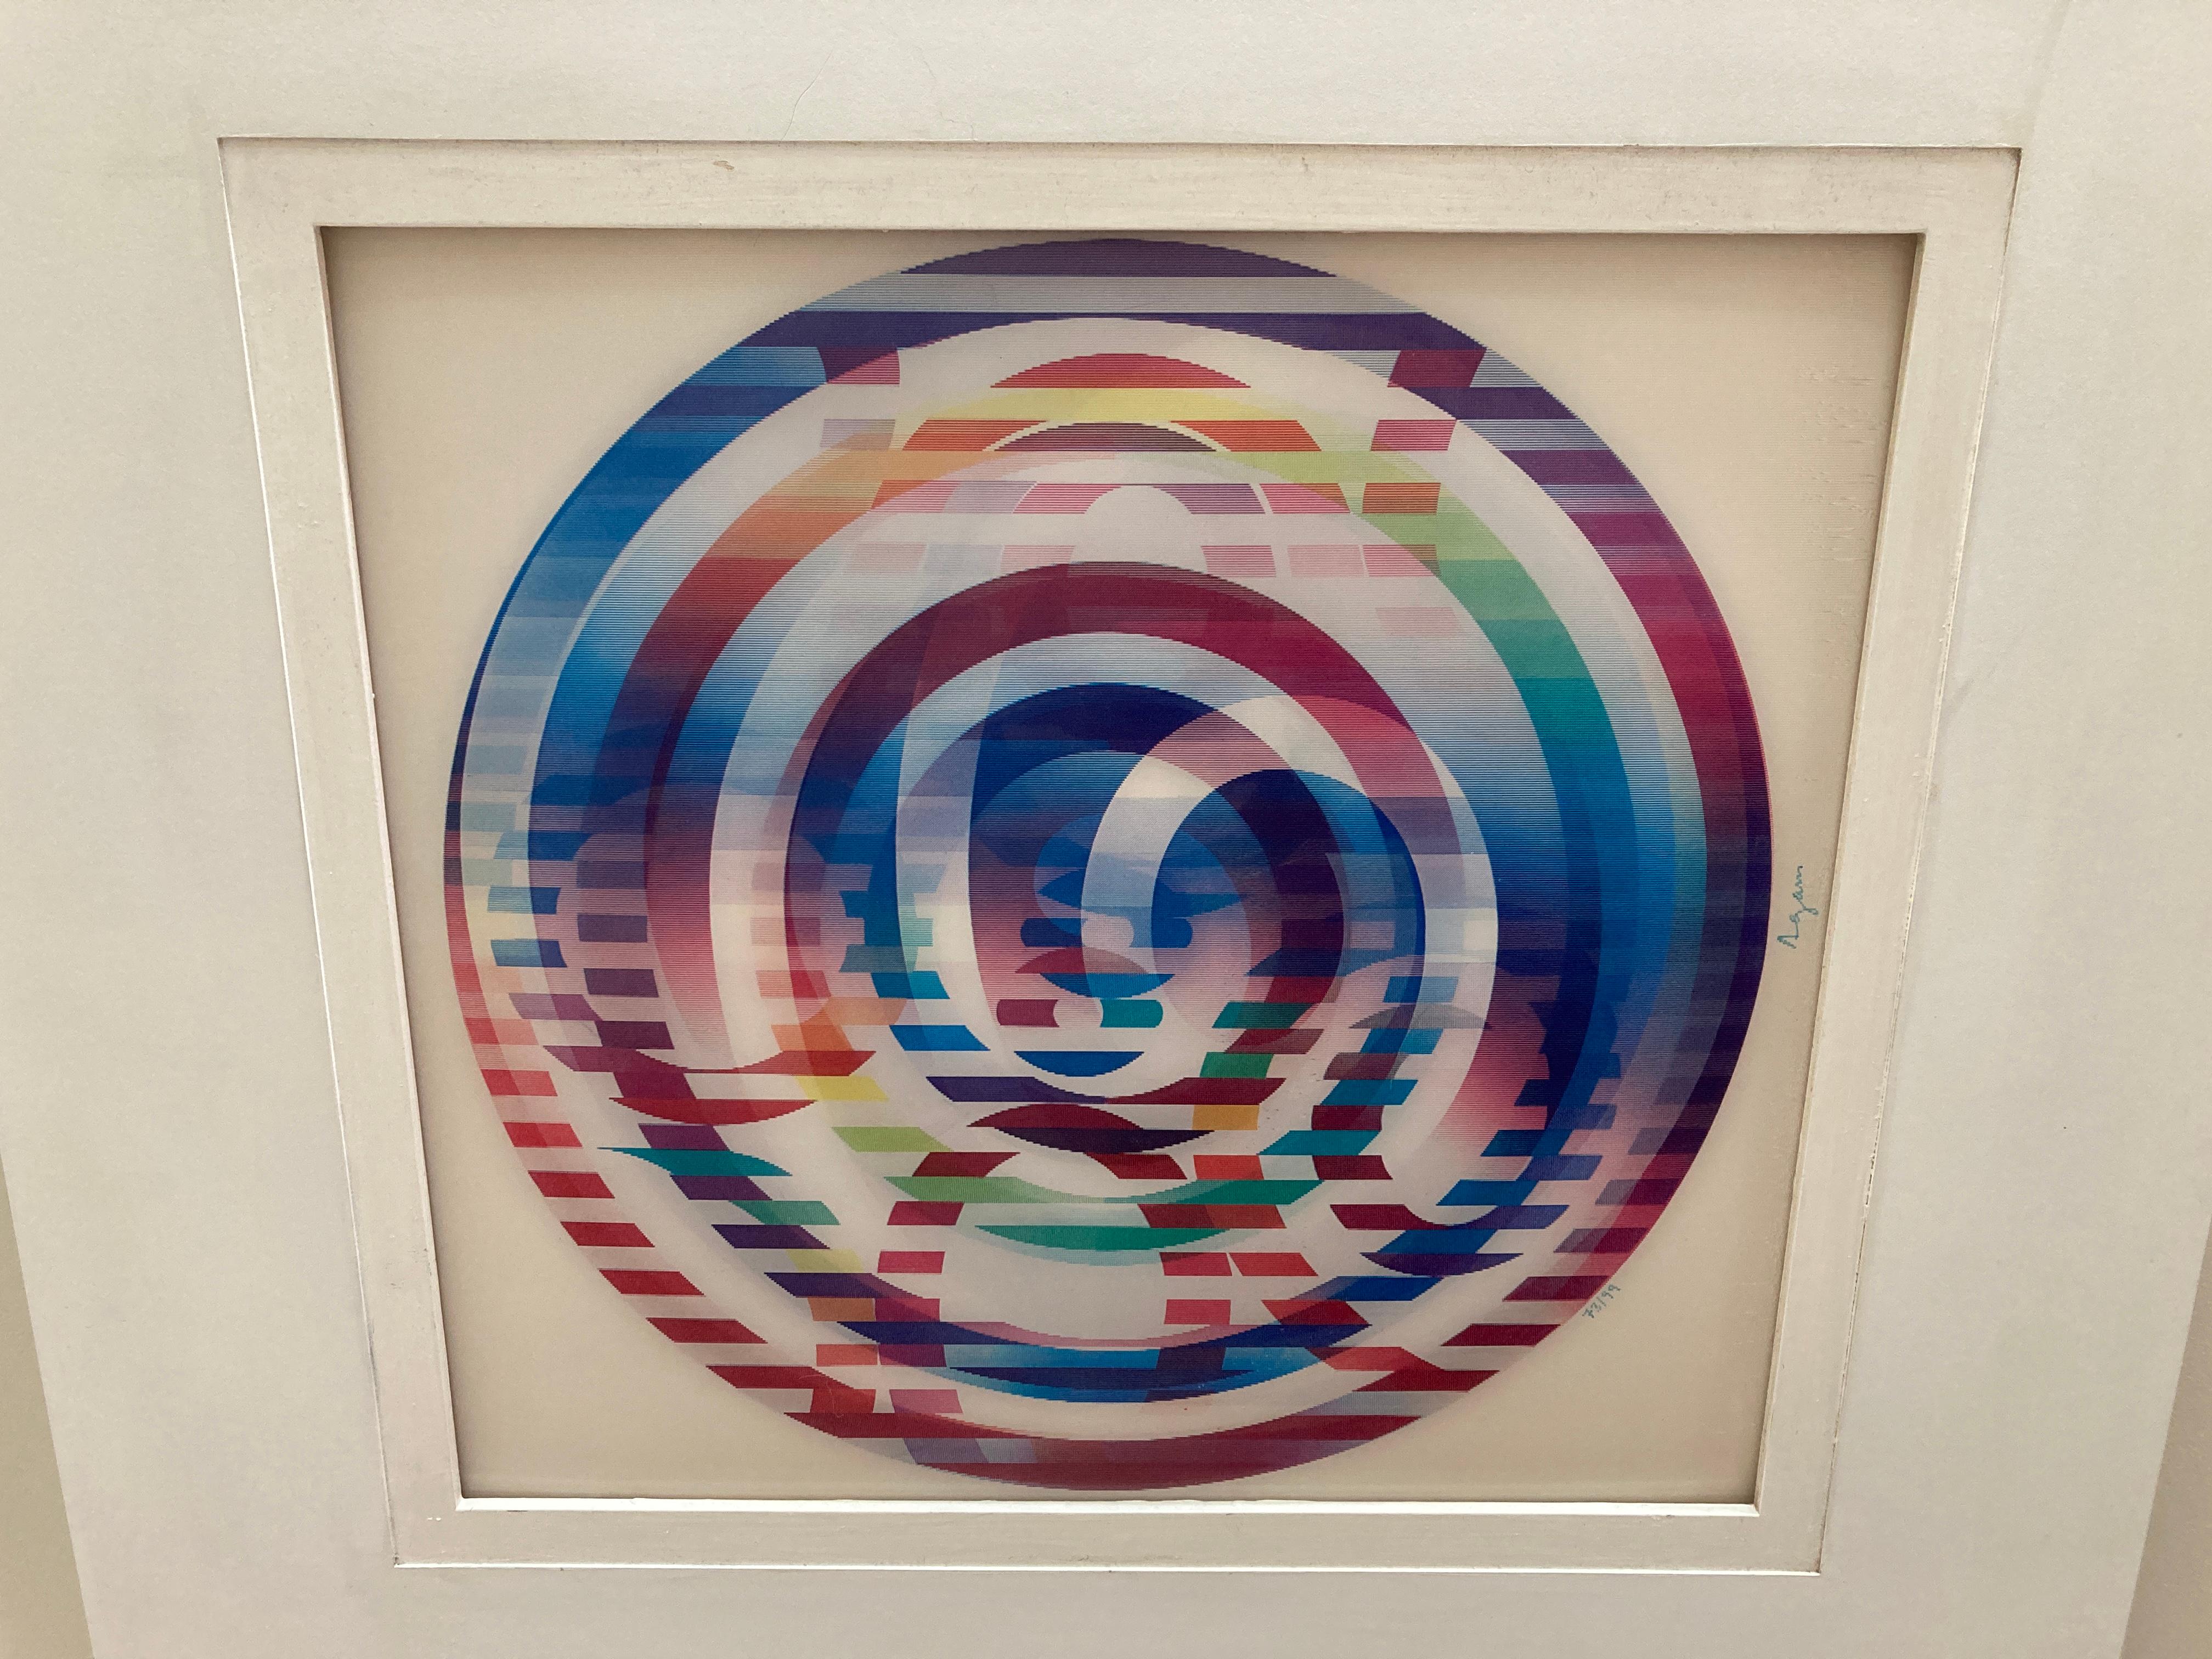 Yaacov Agam 'Image of the World' Signed, Limited Edition Lenticular Agamograph 3